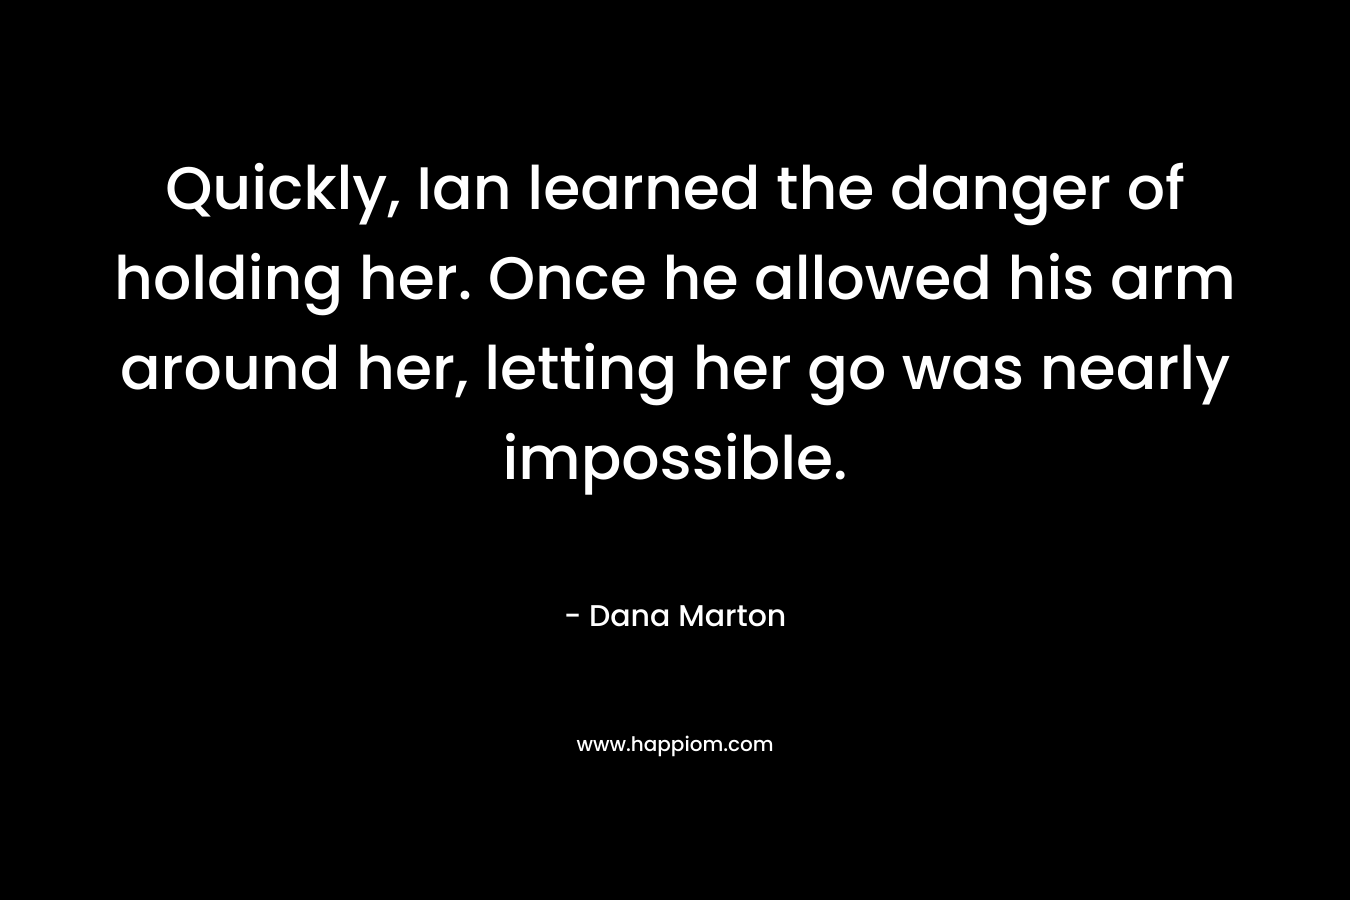 Quickly, Ian learned the danger of holding her. Once he allowed his arm around her, letting her go was nearly impossible. – Dana Marton